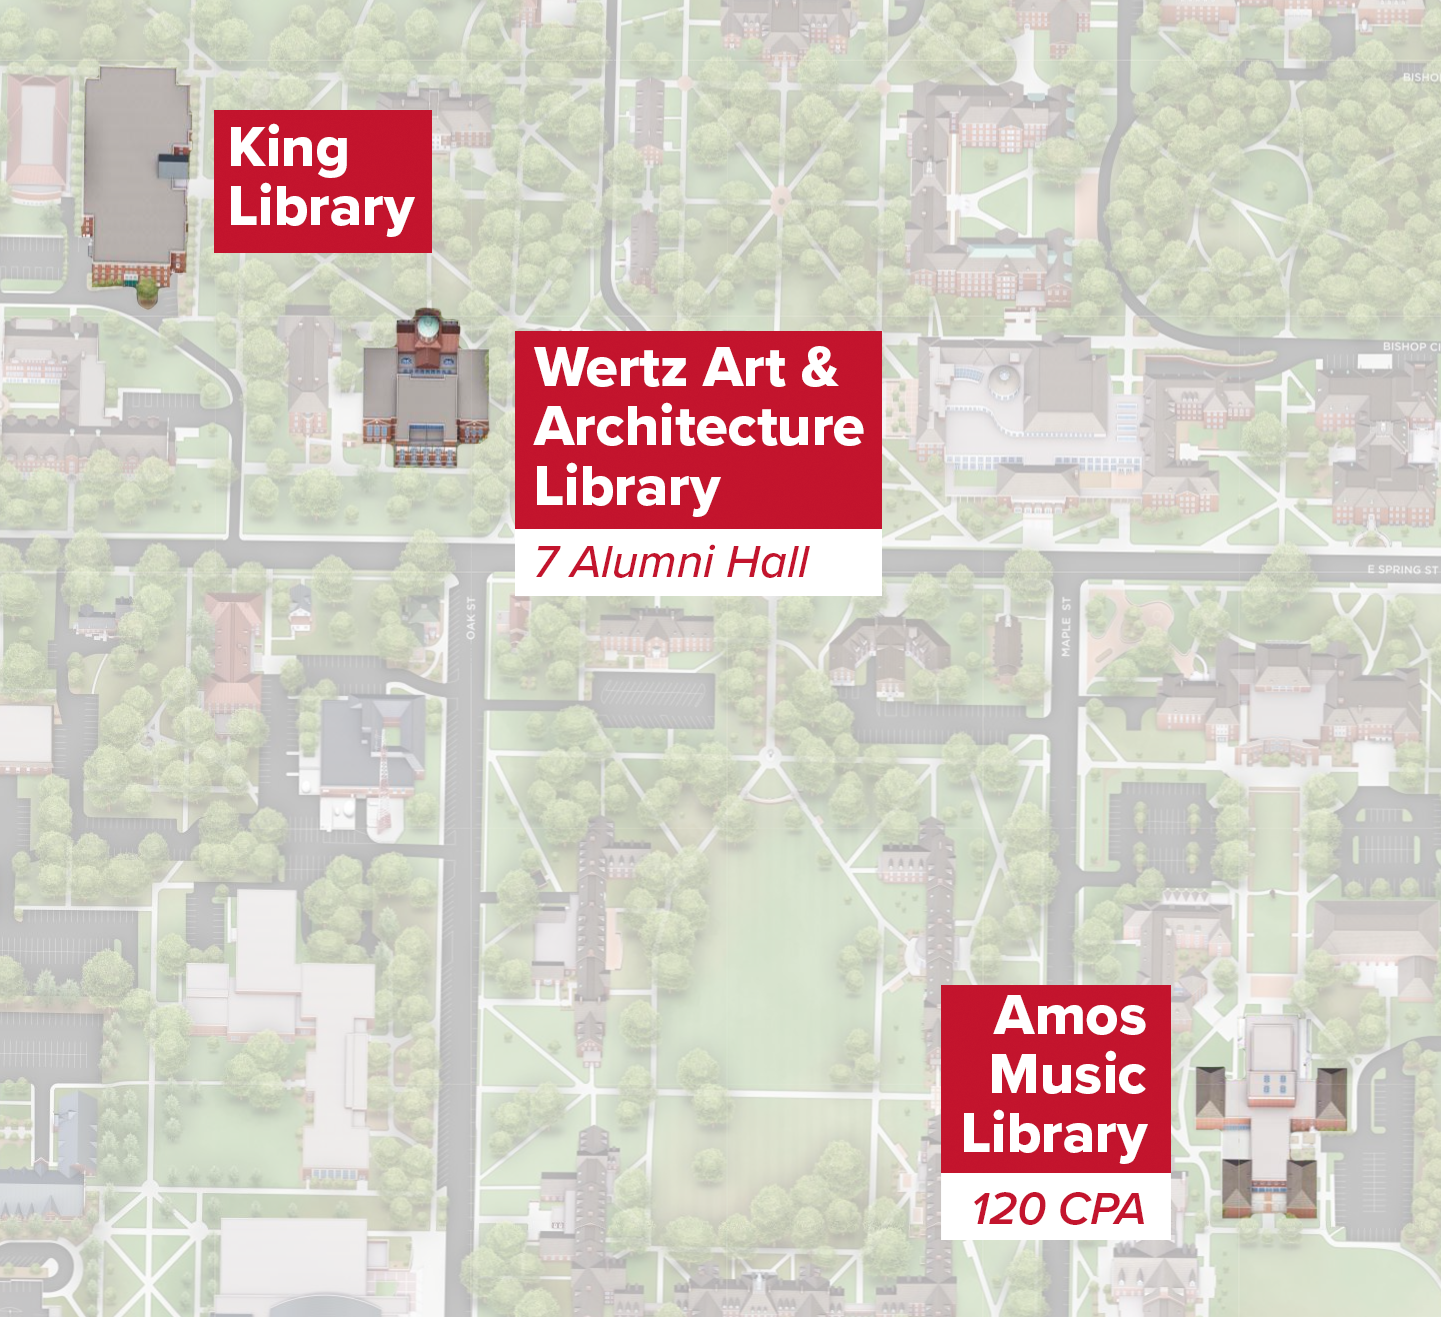 An illustrated Miami University campus map with King Library, Alumni Hall, and the Center for Performing Arts highlighted, along with text alongside each building indicating King LIbrary, Wertz Art & Architecture Library, and Amos Music Library respectively.